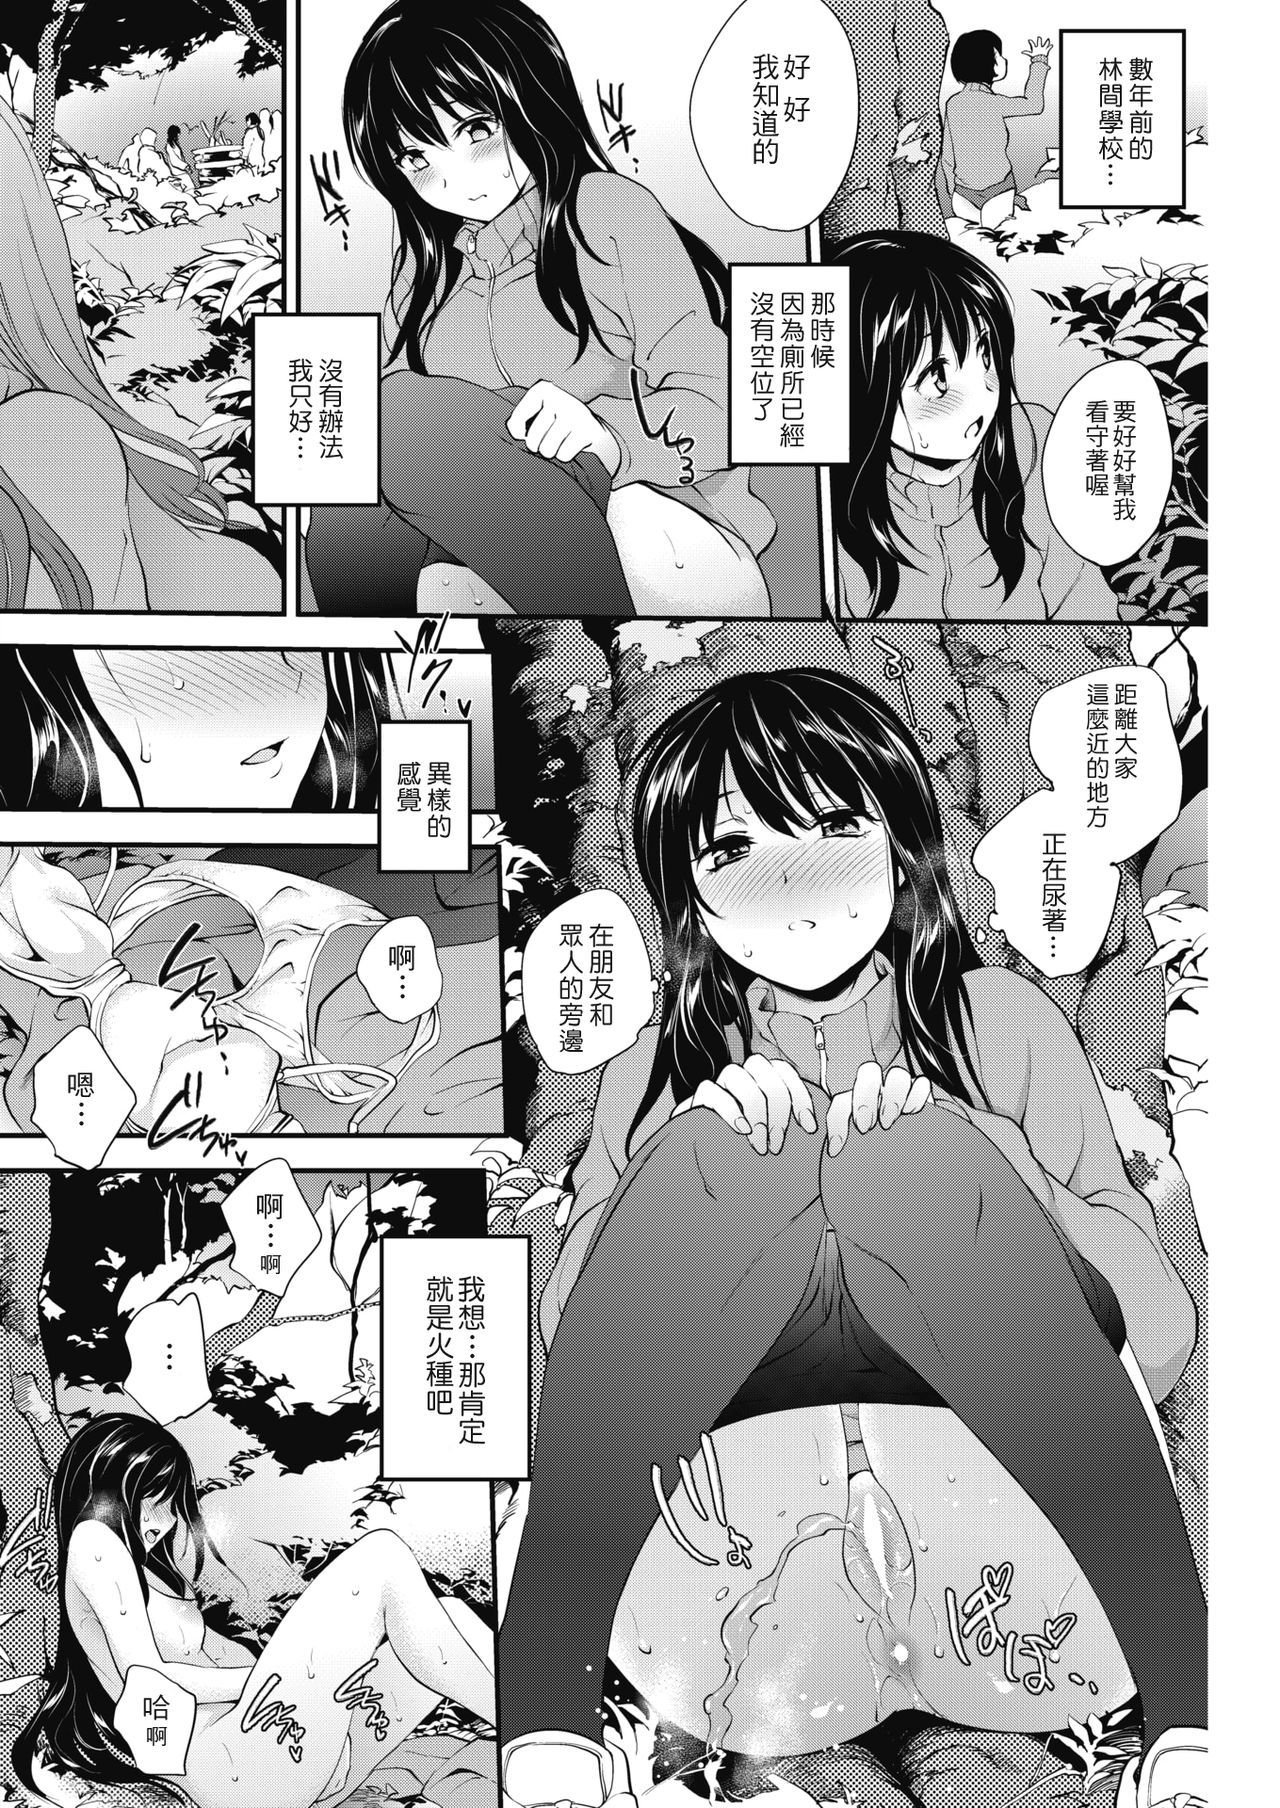 [Monorino] Scorched Girl Zenpen (COMIC HOTMILK 2017-12) [Chinese] [Digital] [モノリノ] Scorched Girl 前編  (コミックホットミルク 2017年12月号) [中国翻訳] [DL版]